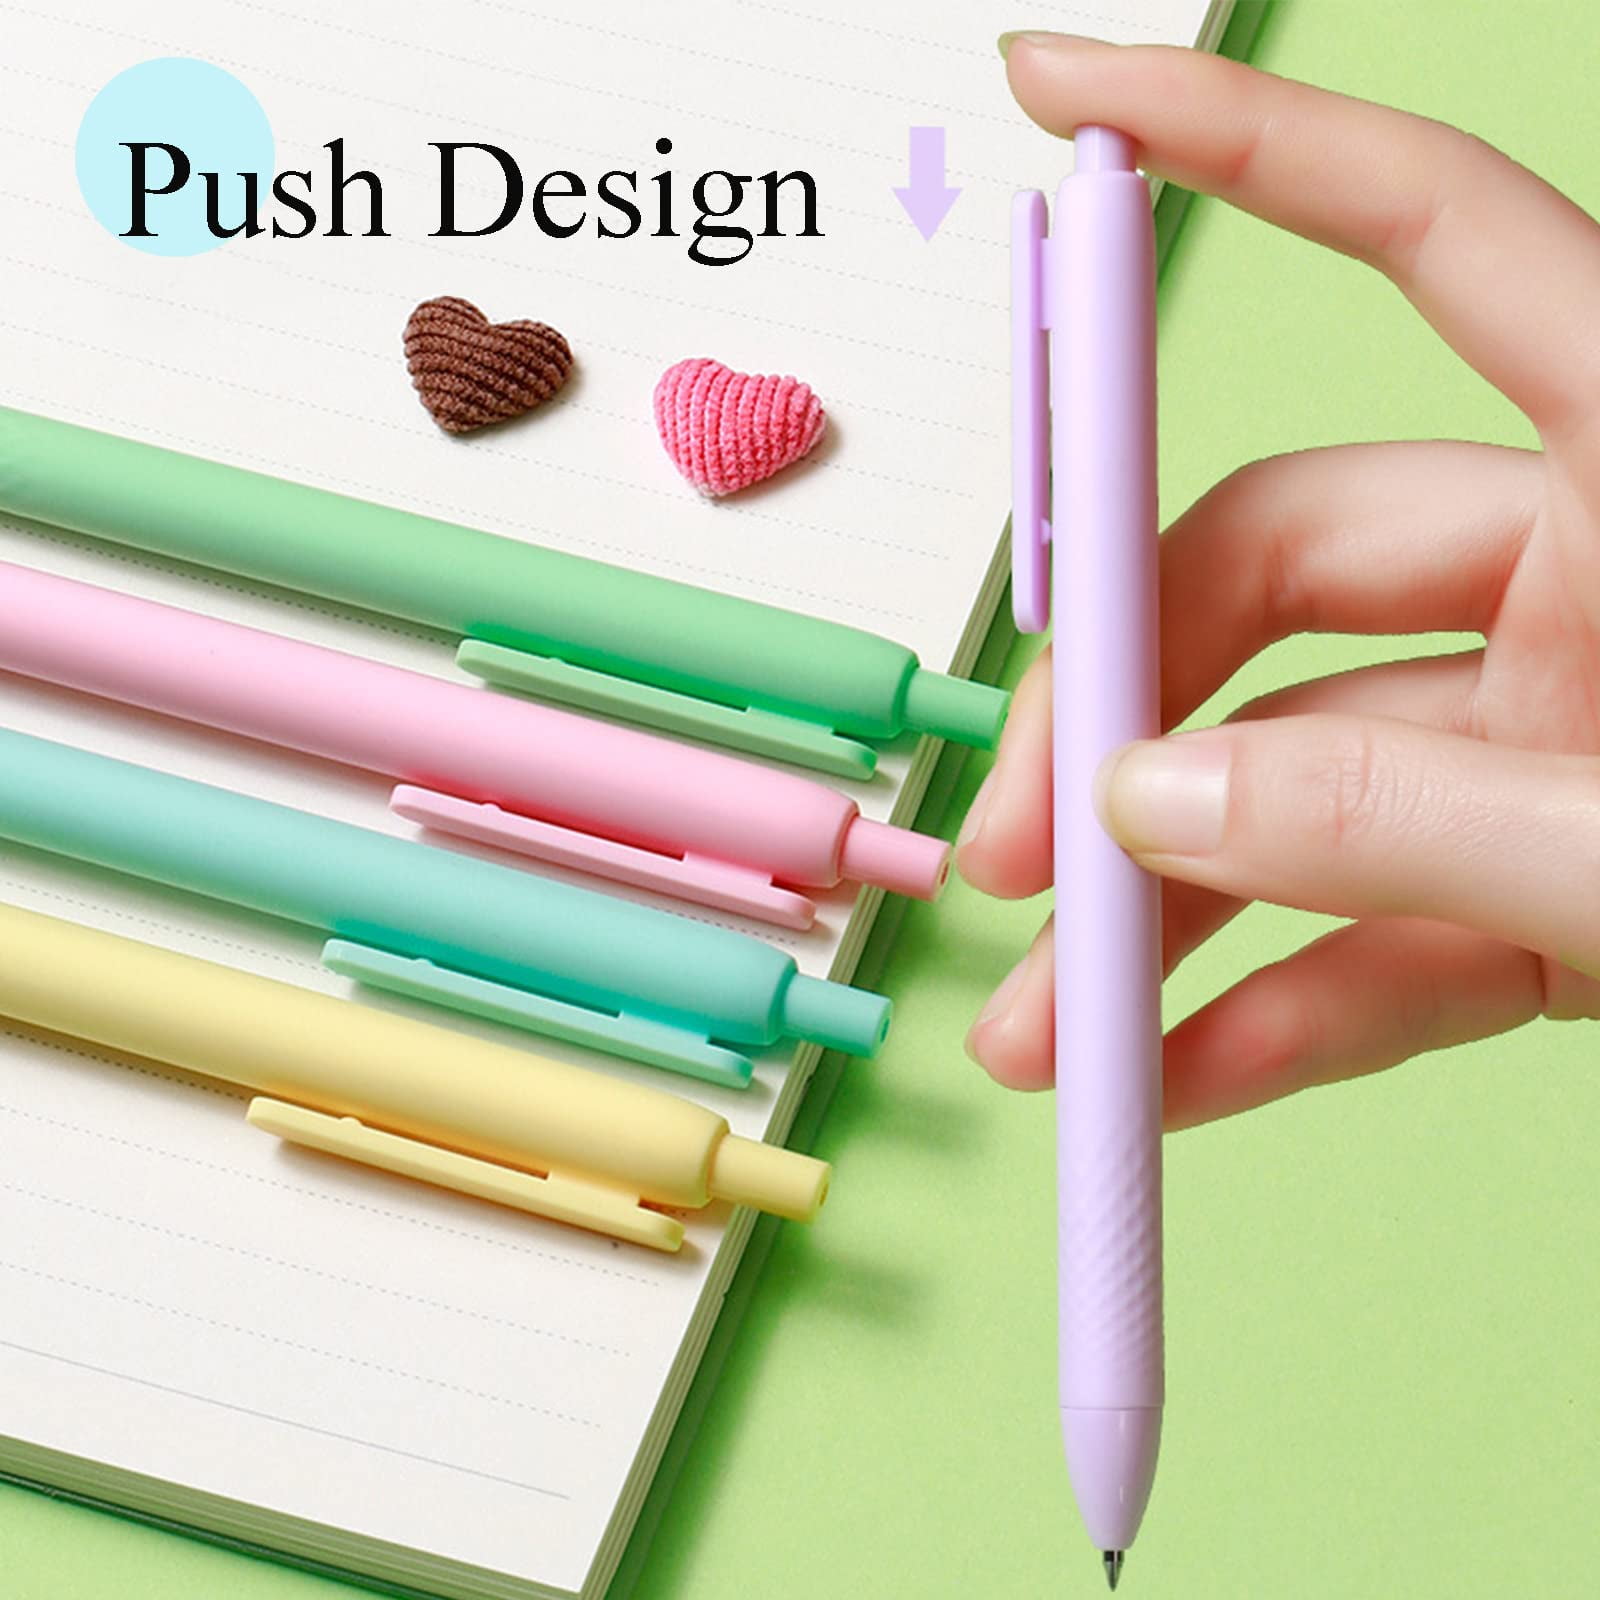 10pcmulticolor Gel Ink Pens, 10 Pieces 0.5 Mm Retractable Ballpoint Pens  Cute Ball Point Pen Writing Pens For Journaling Note Taking School